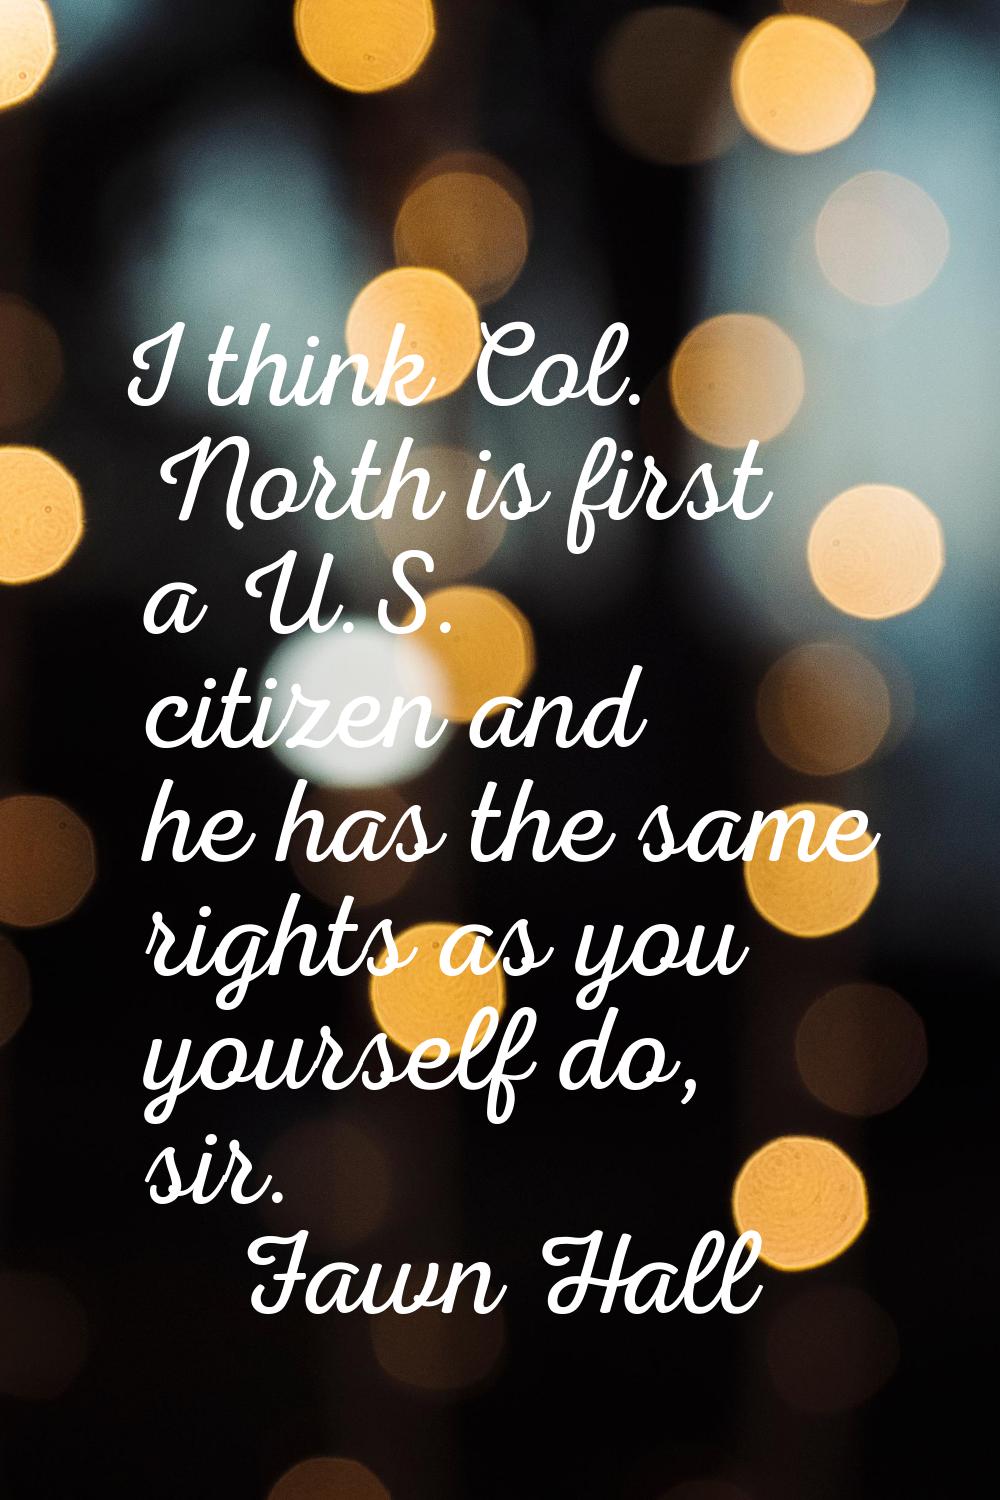 I think Col. North is first a U.S. citizen and he has the same rights as you yourself do, sir.